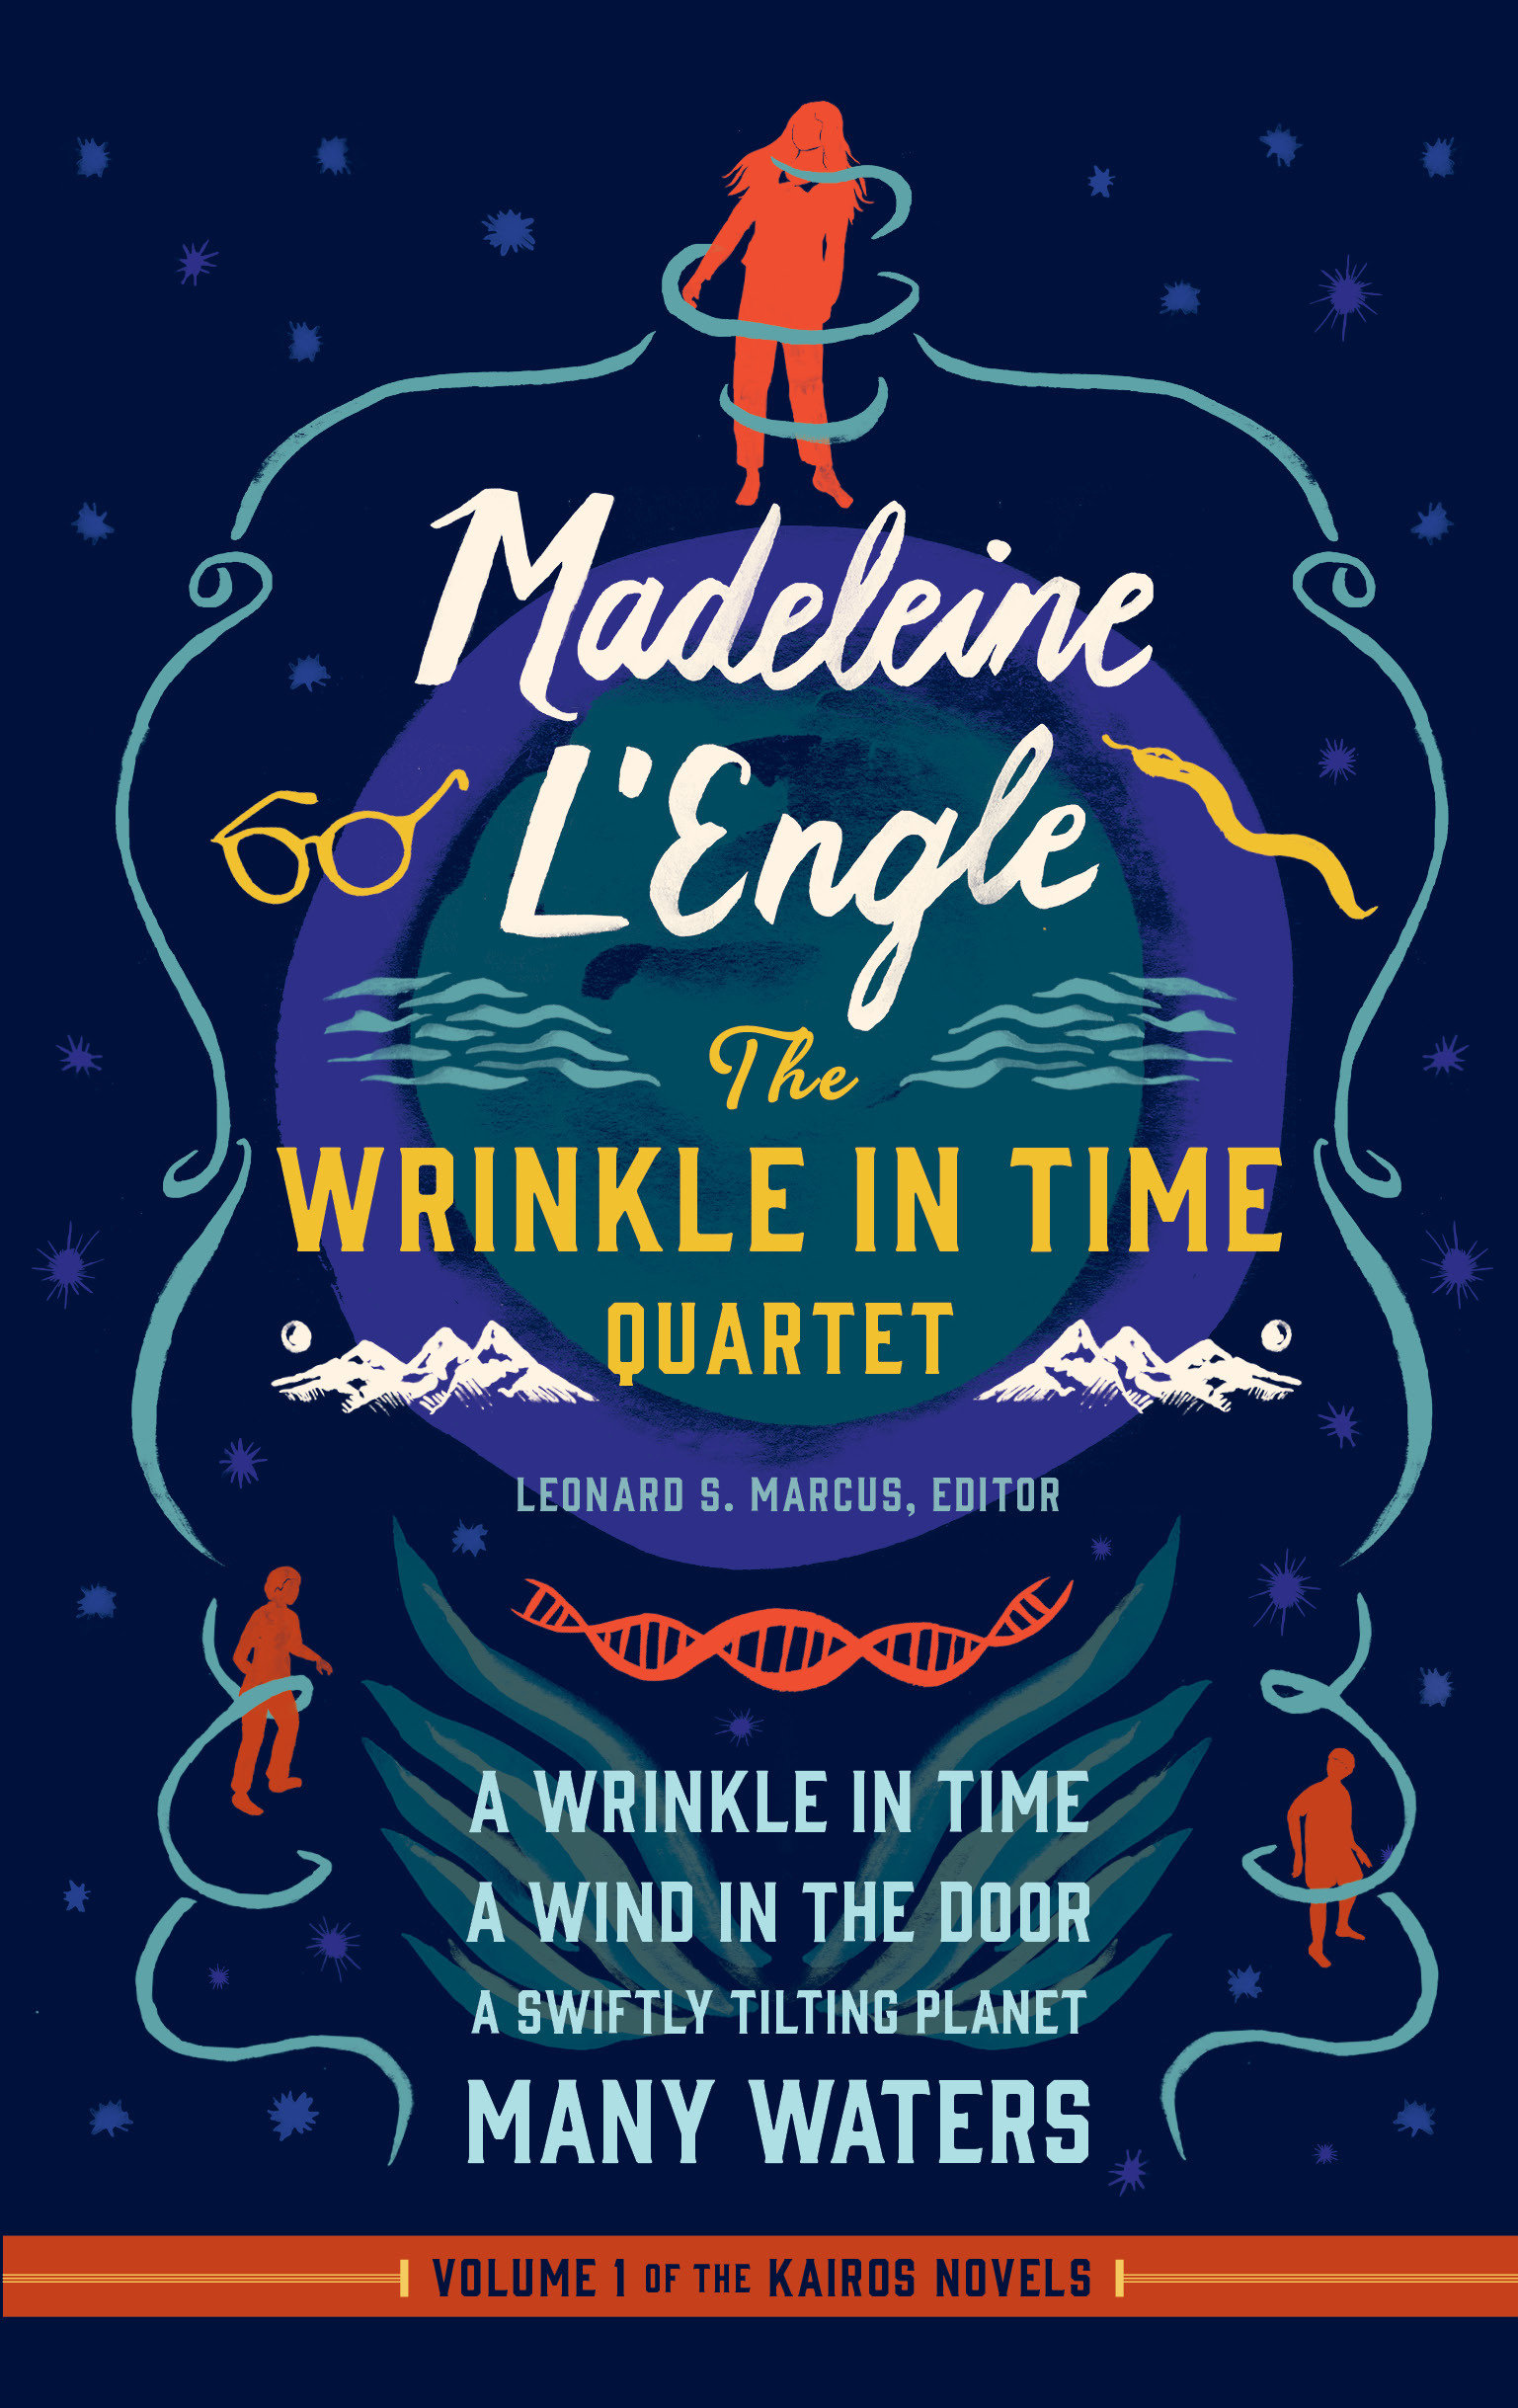 Madeleine L'Engle: The Wrinkle in Time Quartet (LOA #309) A Wrinkle in Time / A Wind in the Door / A Swiftly Tilting Planet / Many Waters